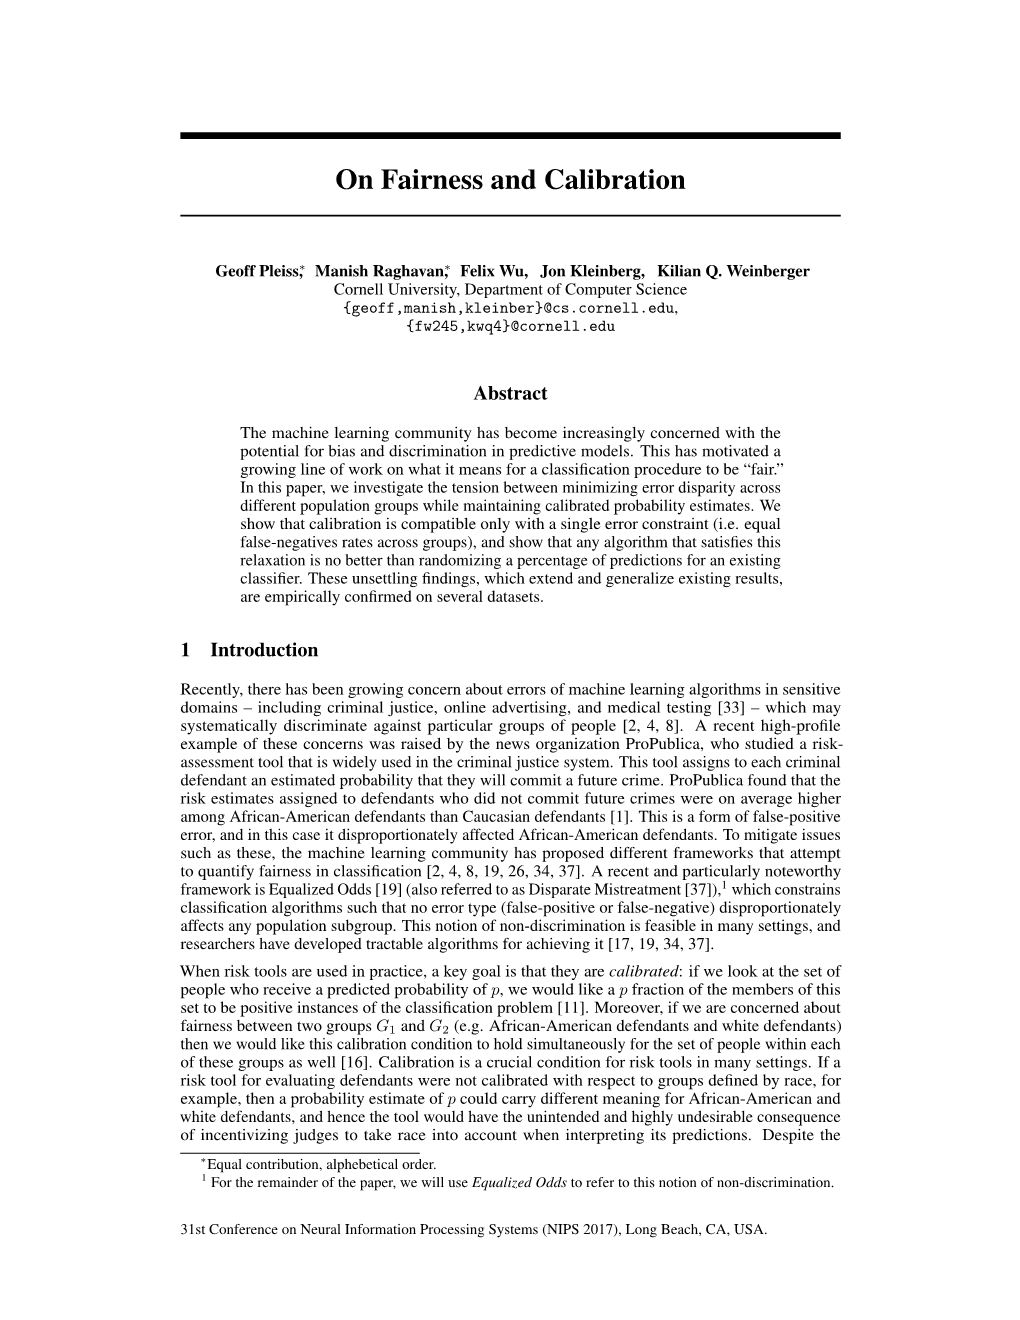 On Fairness and Calibration